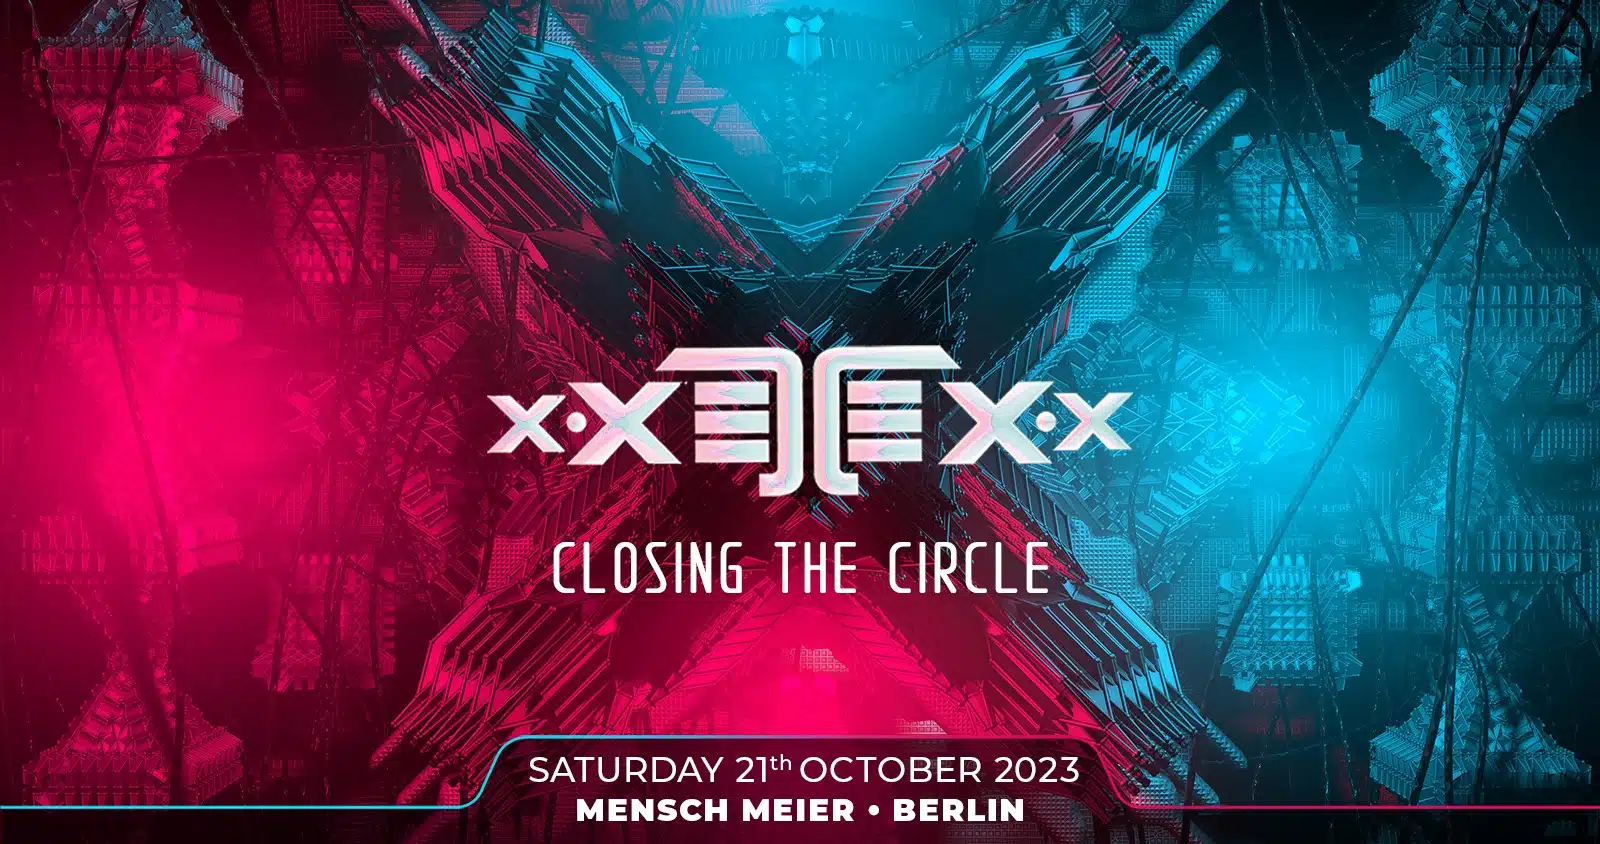 xxetexx closing party banner